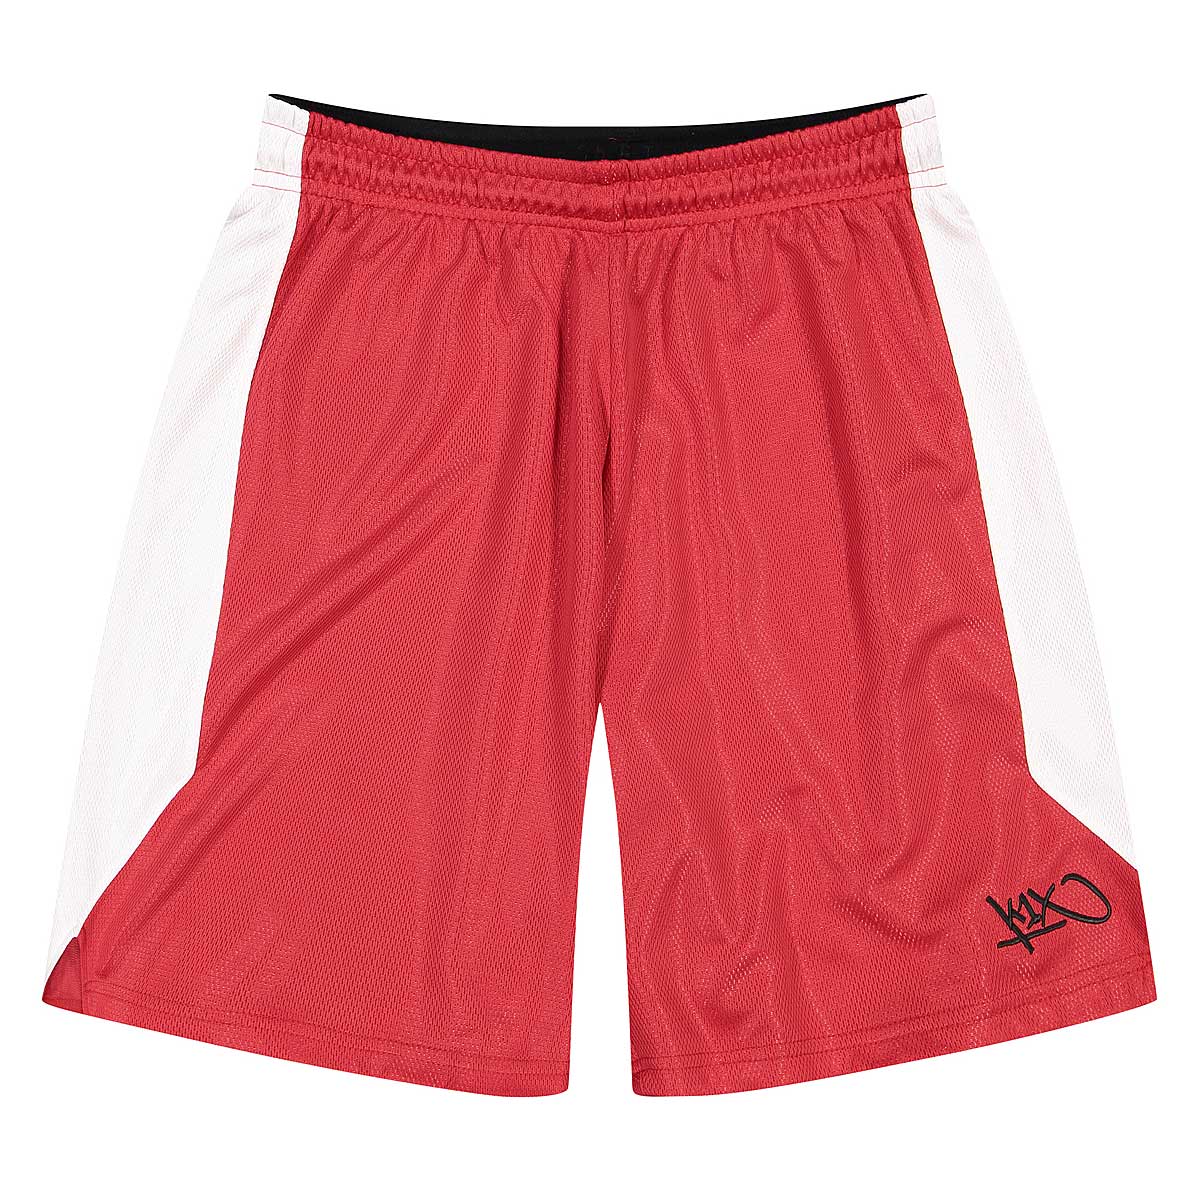 K1X Triple Double Shorts, Red